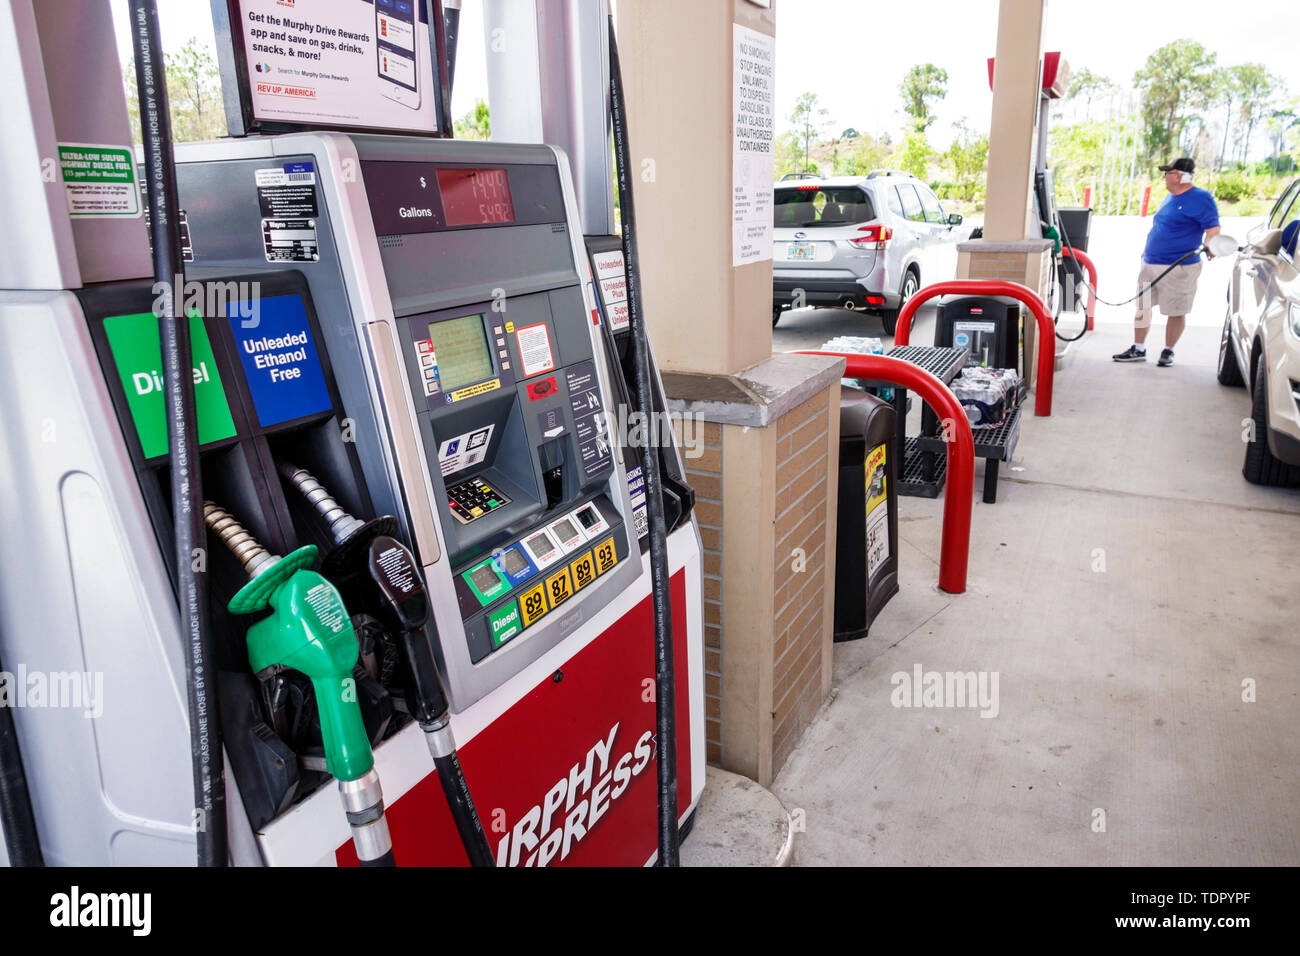 Fort Ft. Myers Florida,Murphy Express,gas filling station,petrol,fuel pumps,dispensers are used to pump,nozzle,diesel,unleaded ethanol free,FL19051000 Stock Photo